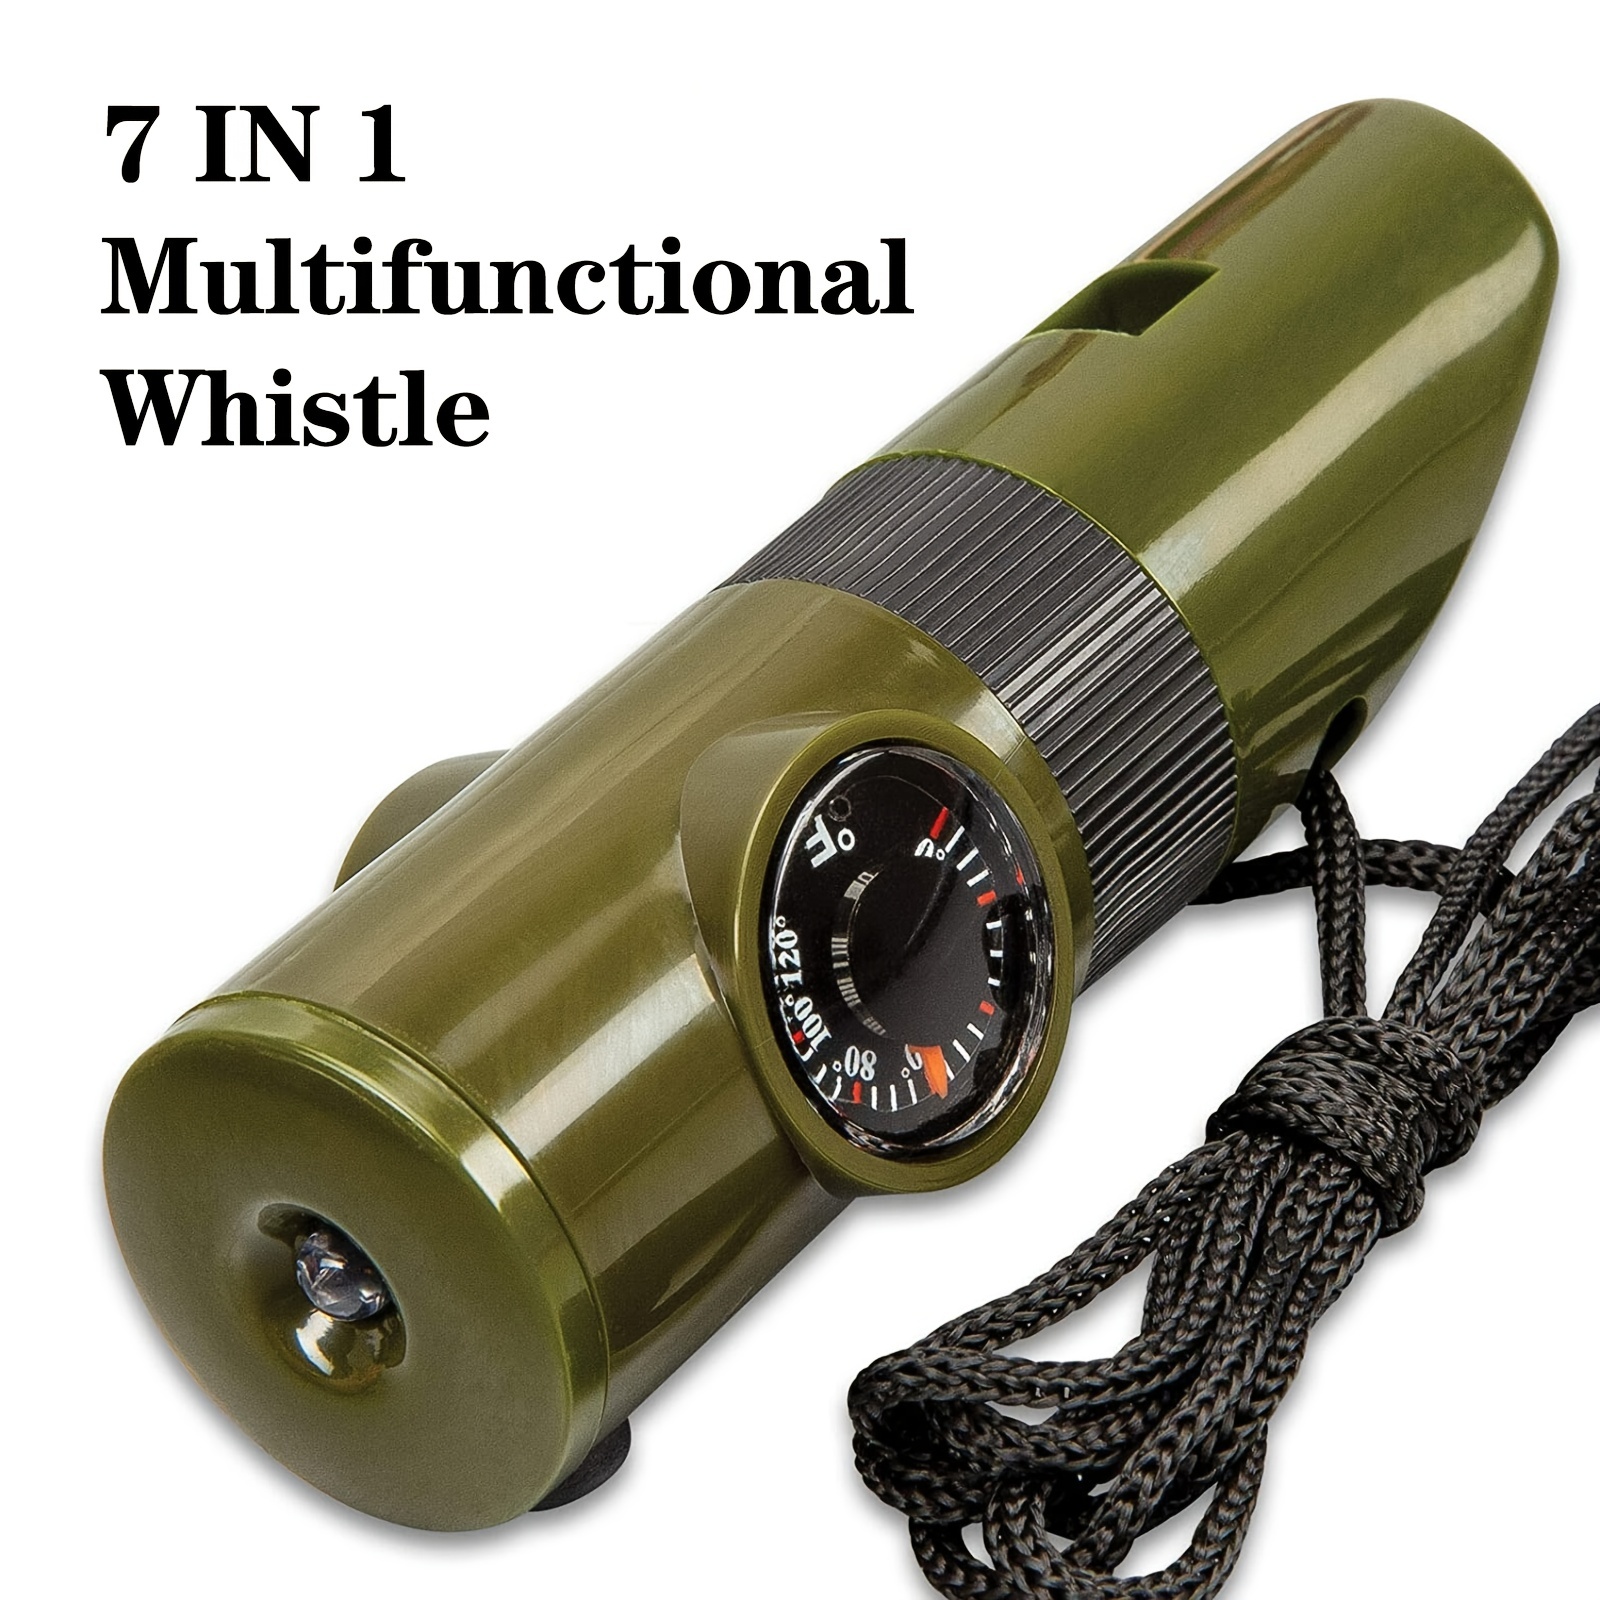 ABS 7 In 1 Survival Whistle with LED Light, Magnifying Glass & More